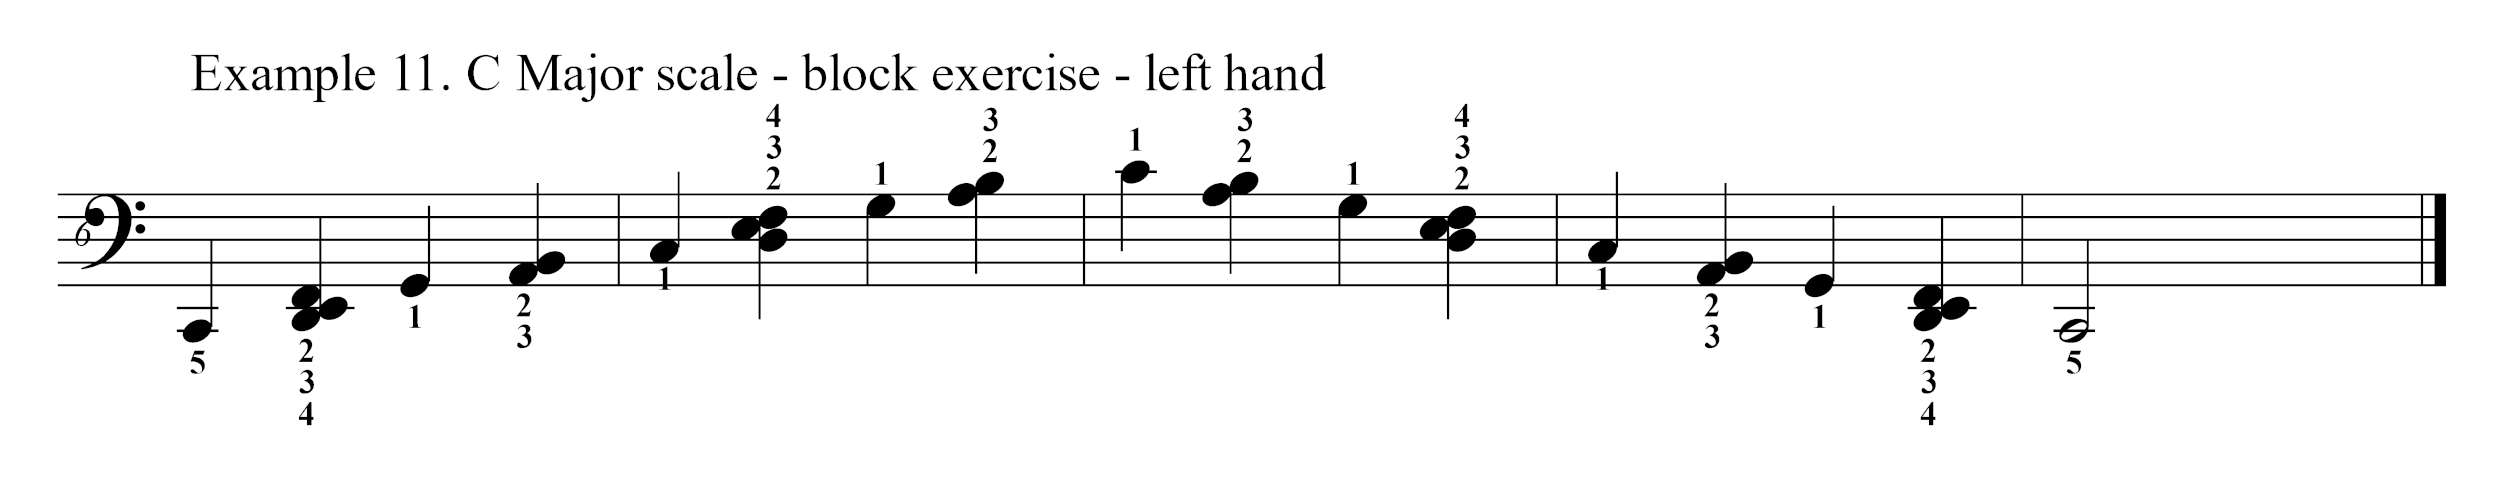 Block positions exercise left hand piano scale